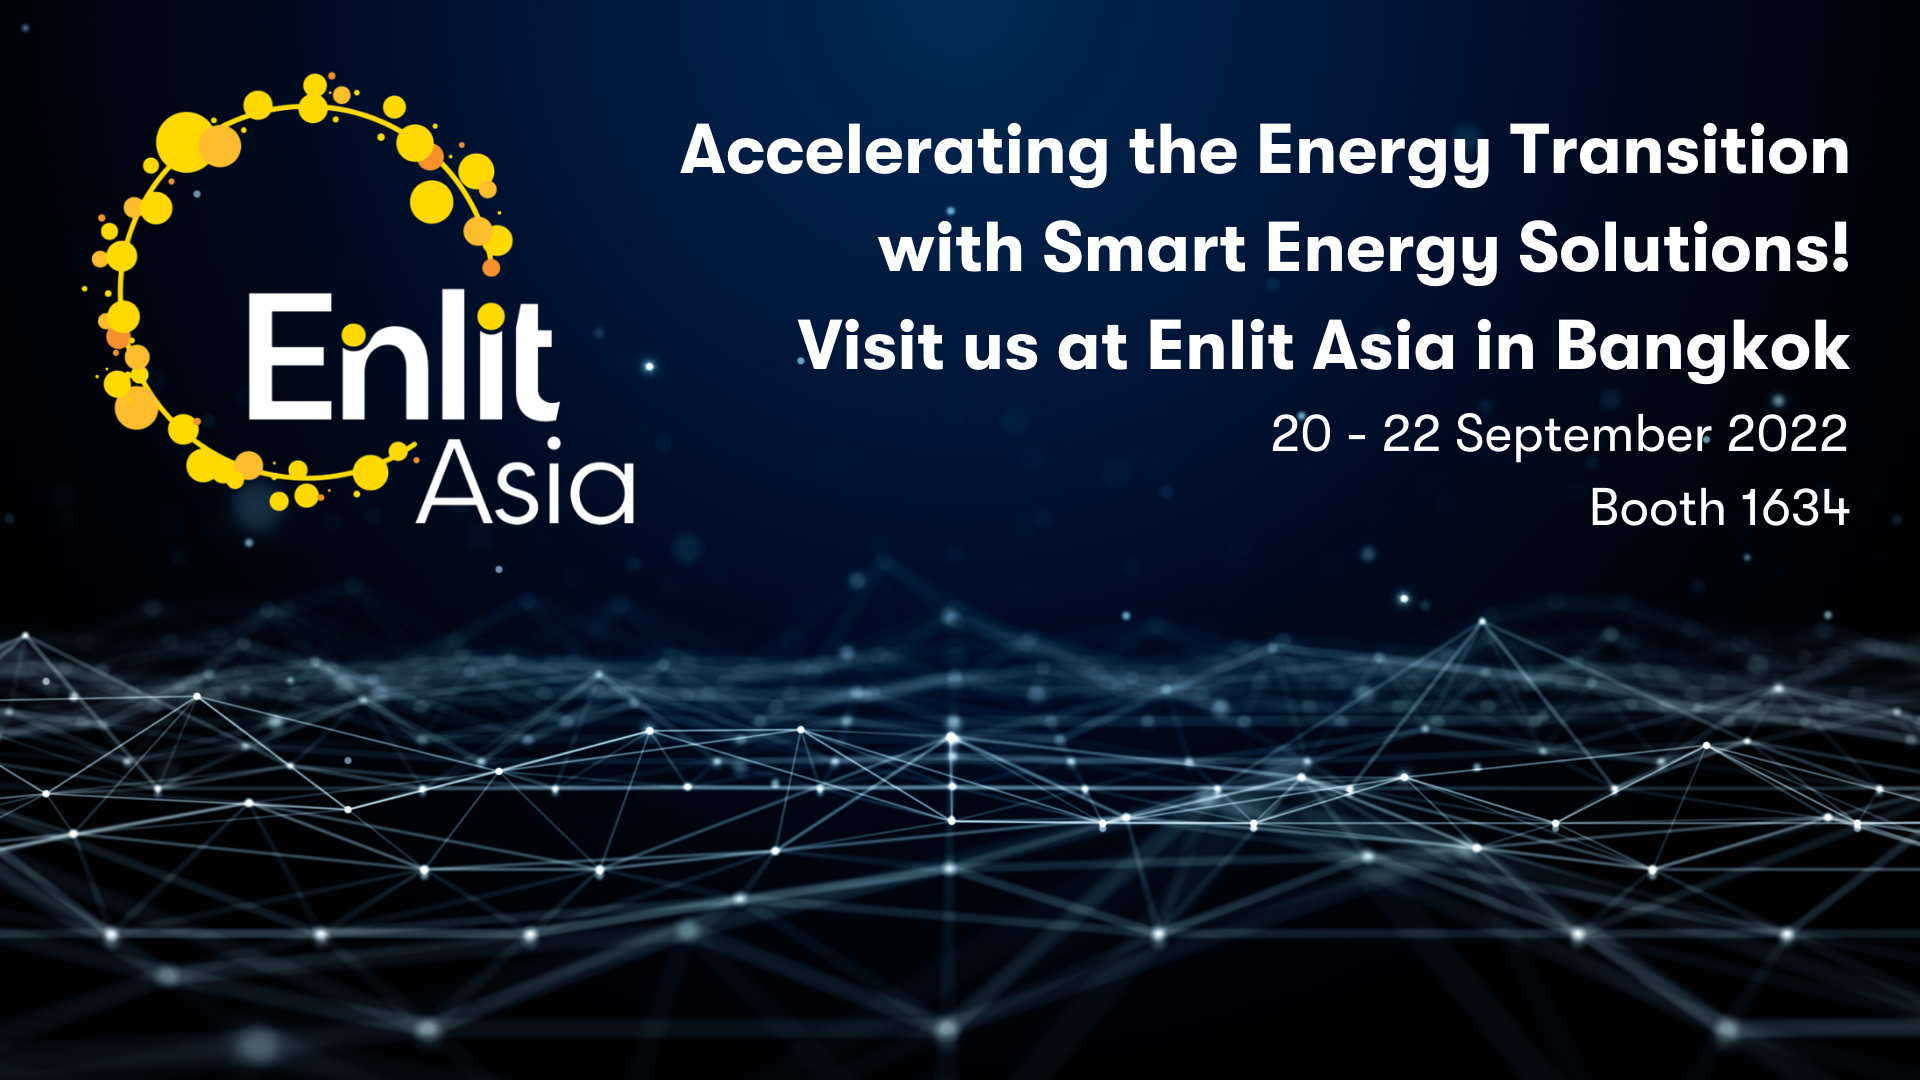 uploads/pics/https://trading.iqony.energy/uploads/pics/Accelerating_the_Energy_Transition_with_Smart_Digital_Solutions_Visit_us_at_Enlit_Asia_in_Bangkok__1__05.png